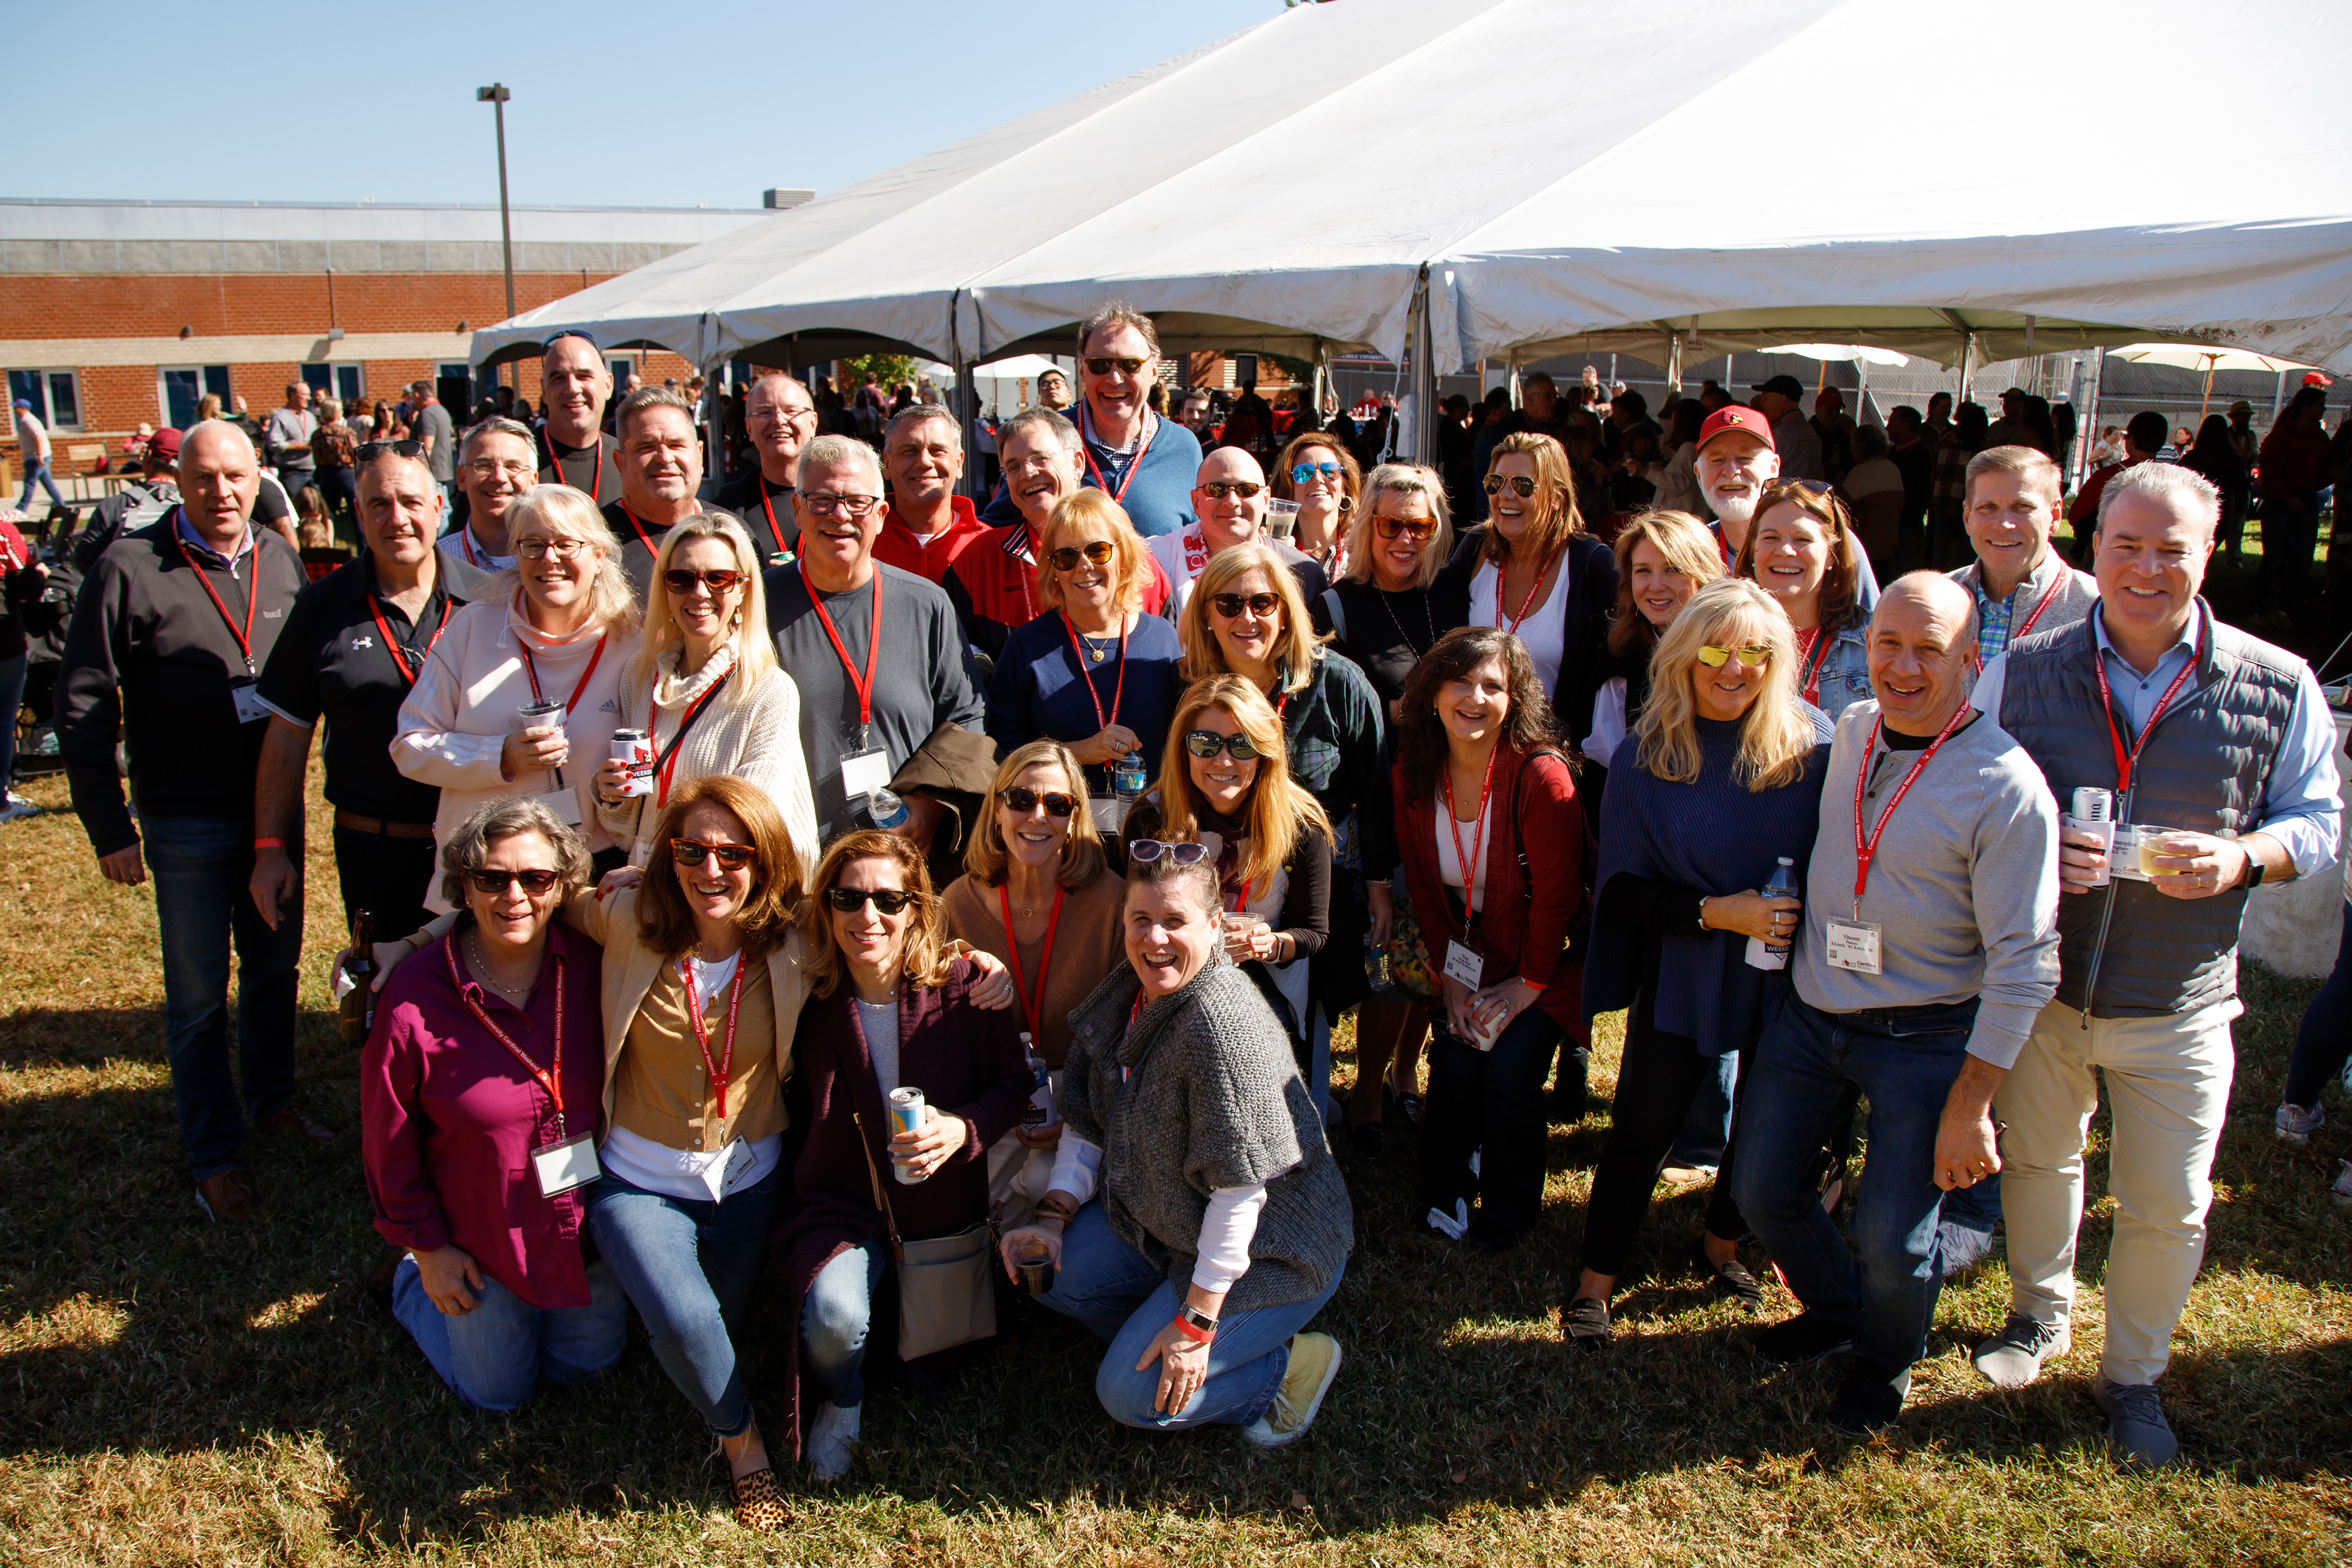 Group of Alumni posed at tent party